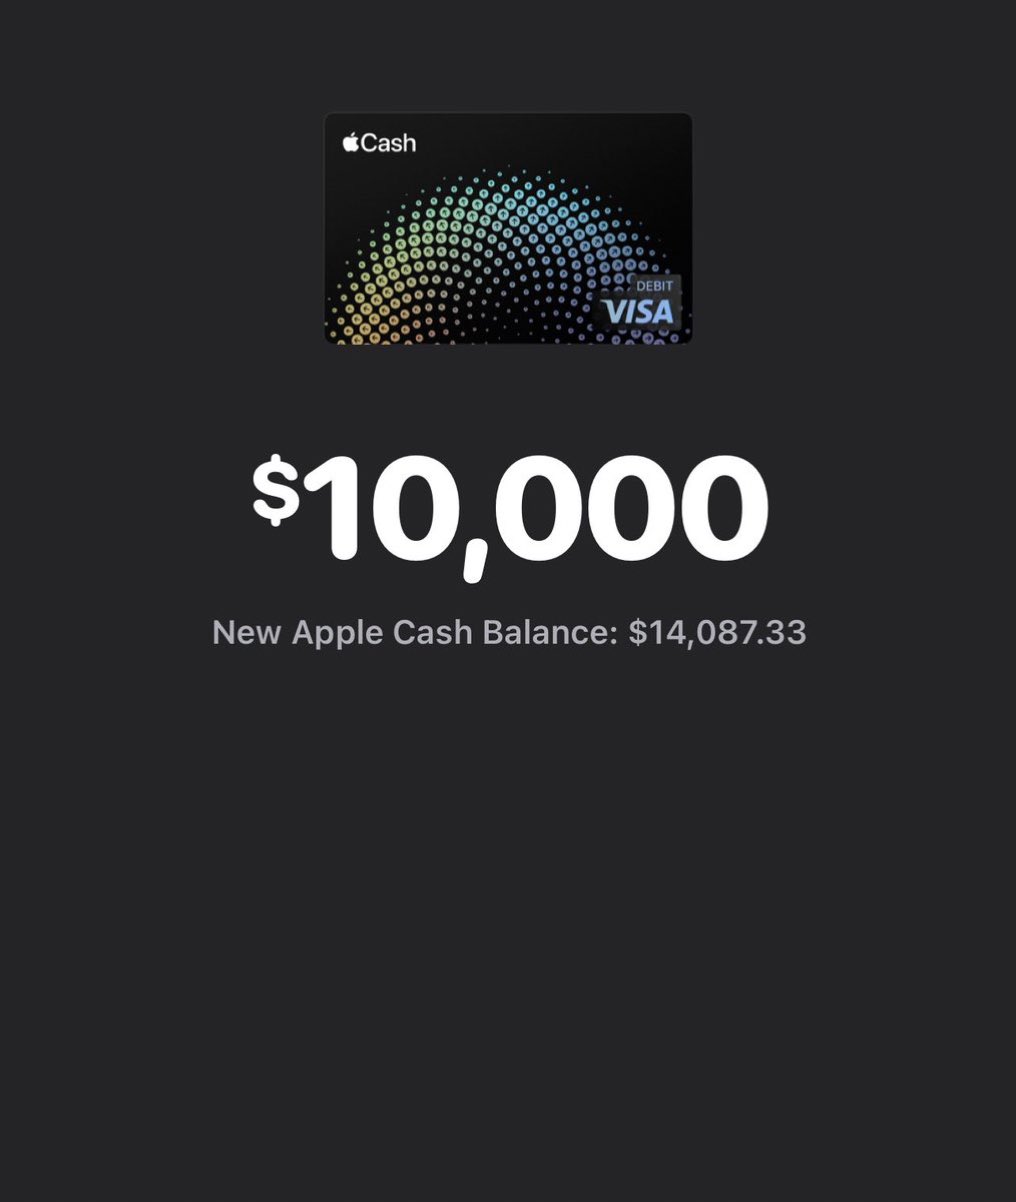 Cash App on X: Pencils down. We're giving away $125K for